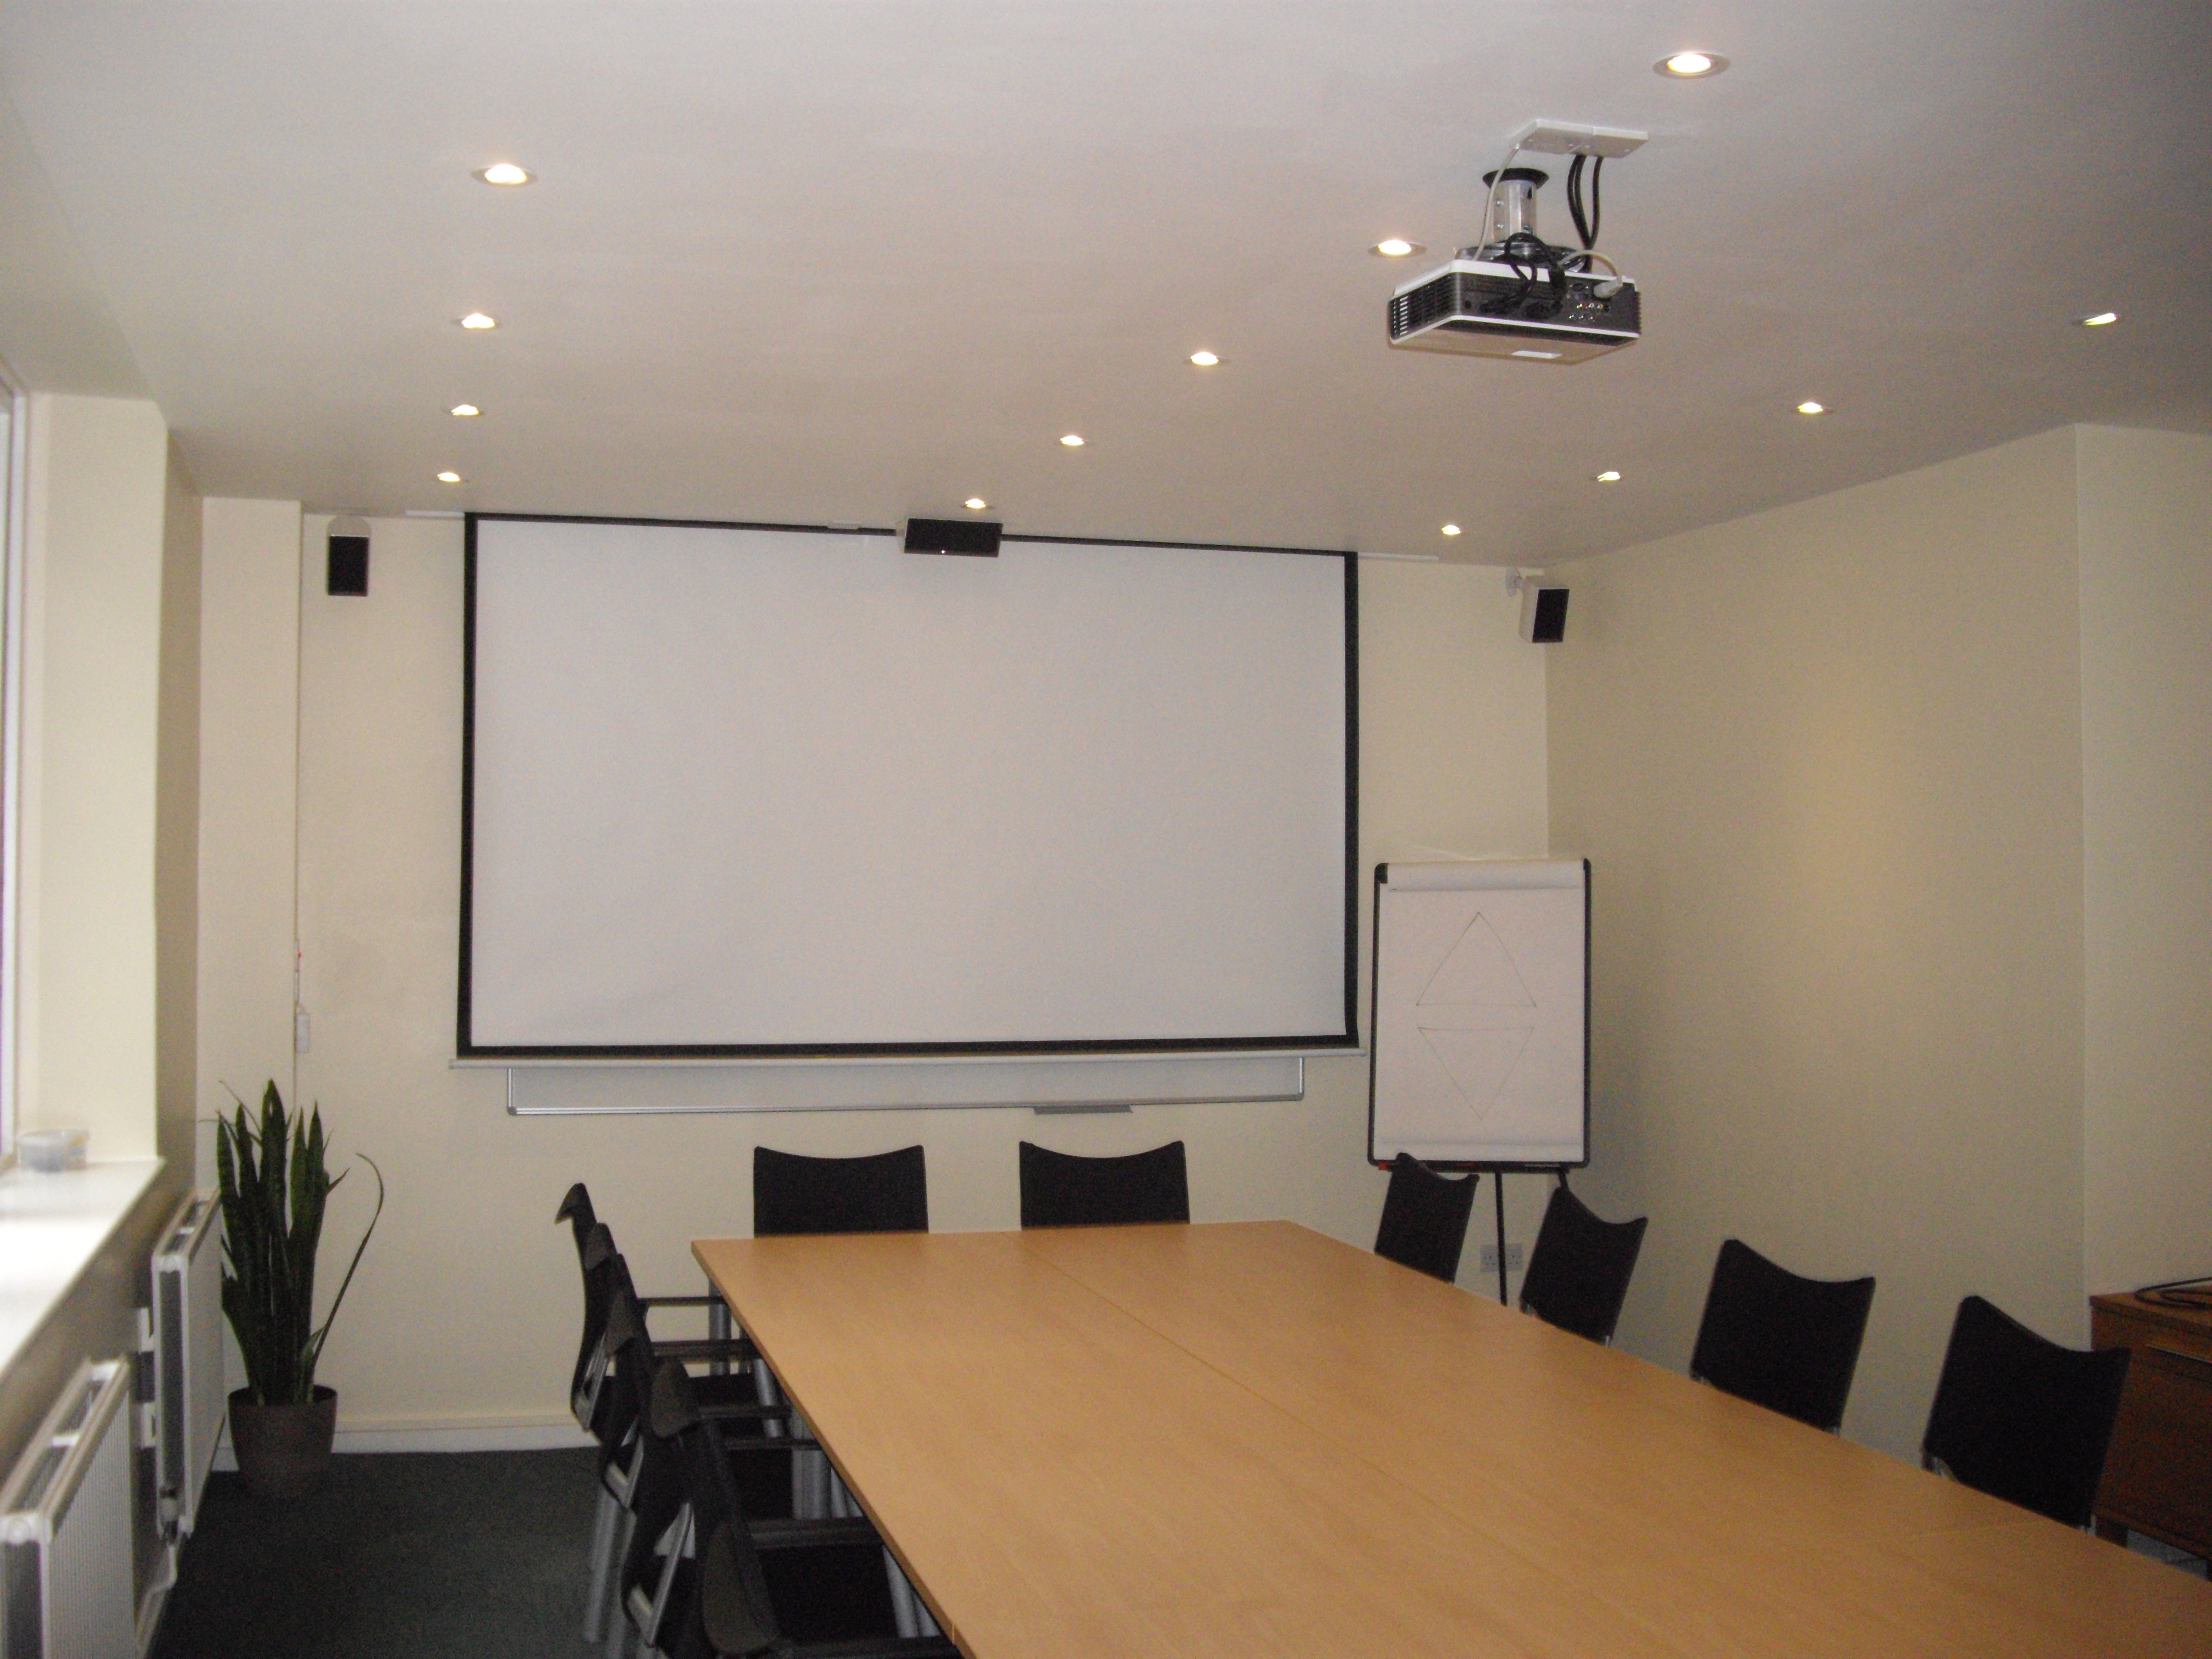 Let us add electrics to your board / meeting room